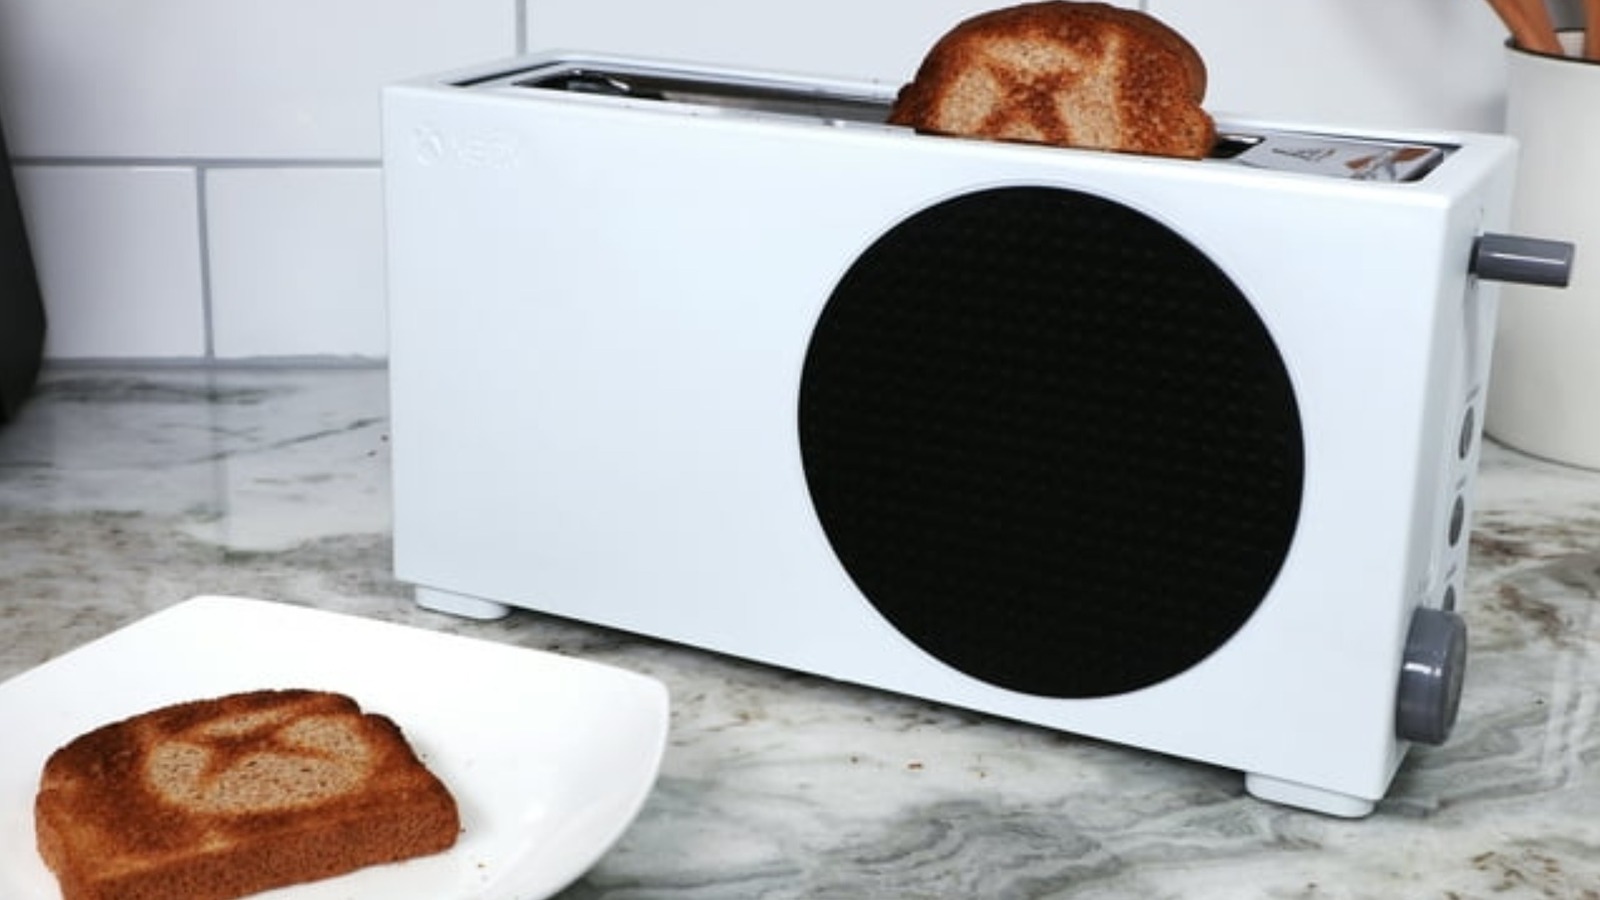 (This Xbox Toaster Might Be The Strangest Microsoft Product You Can Actually Buy) 1xBet